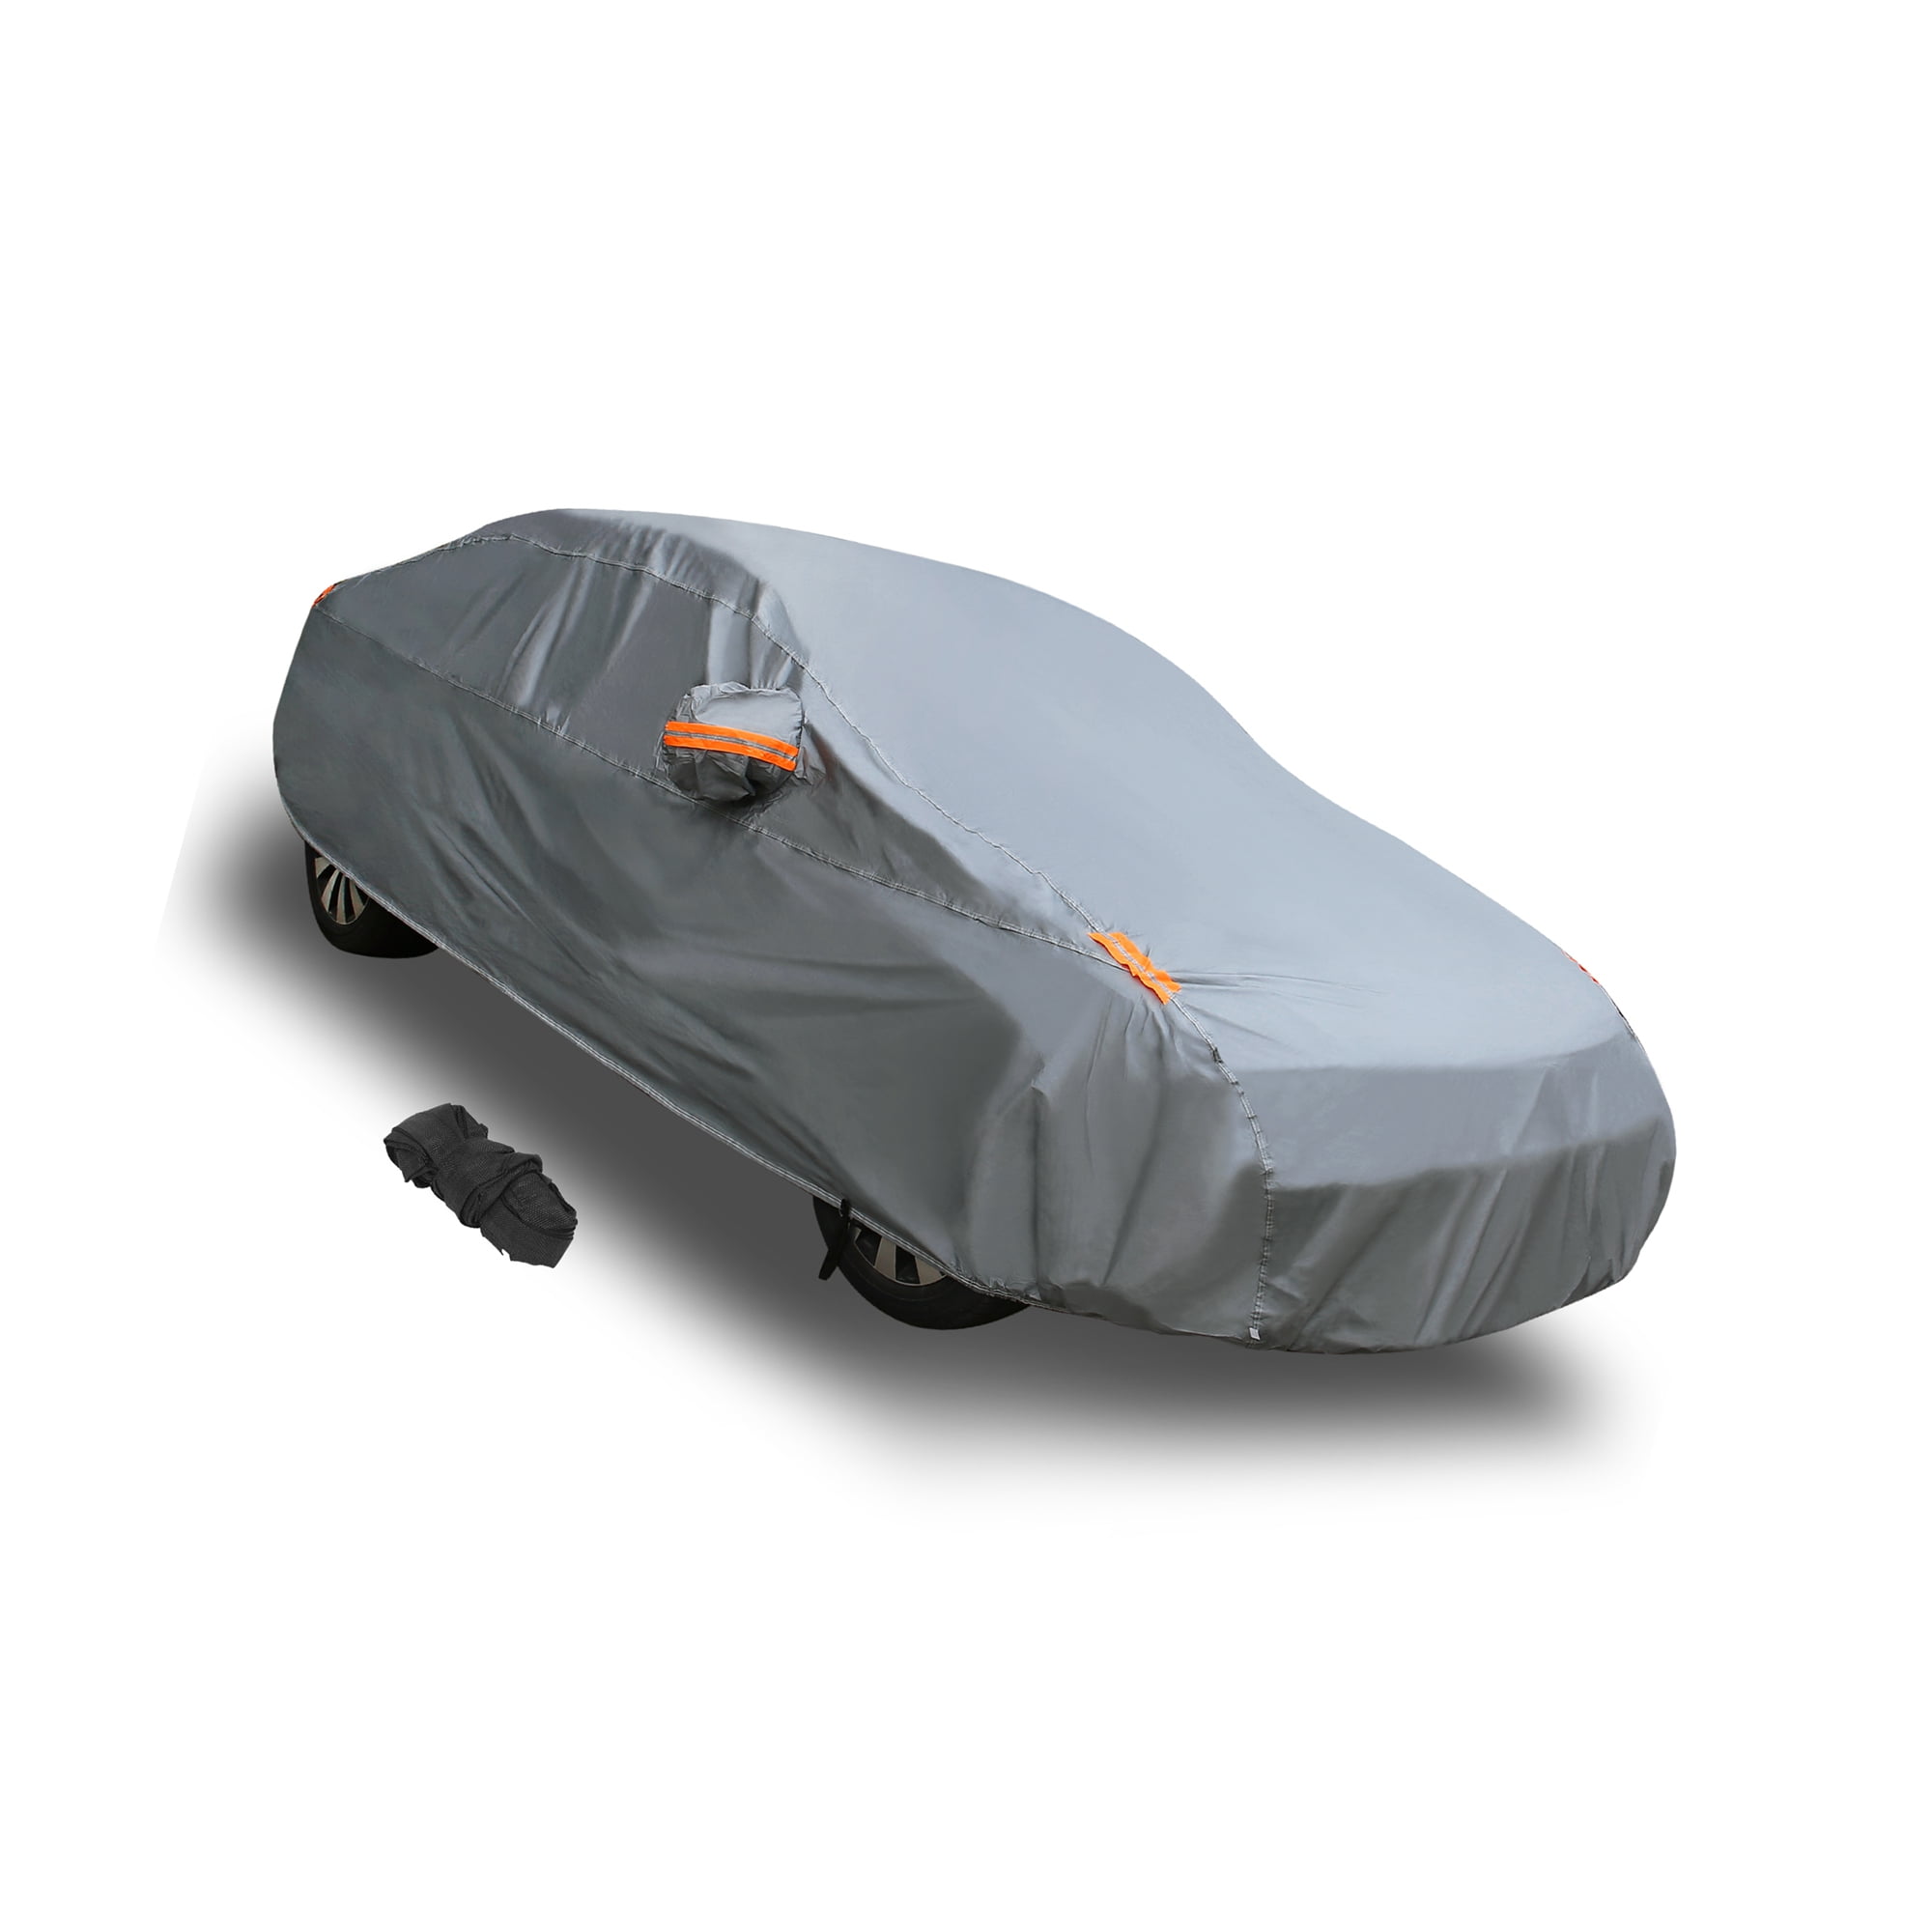 PEVA Full Car Cover Waterproof Breathable Sun Resistant Soft Lining Gray 